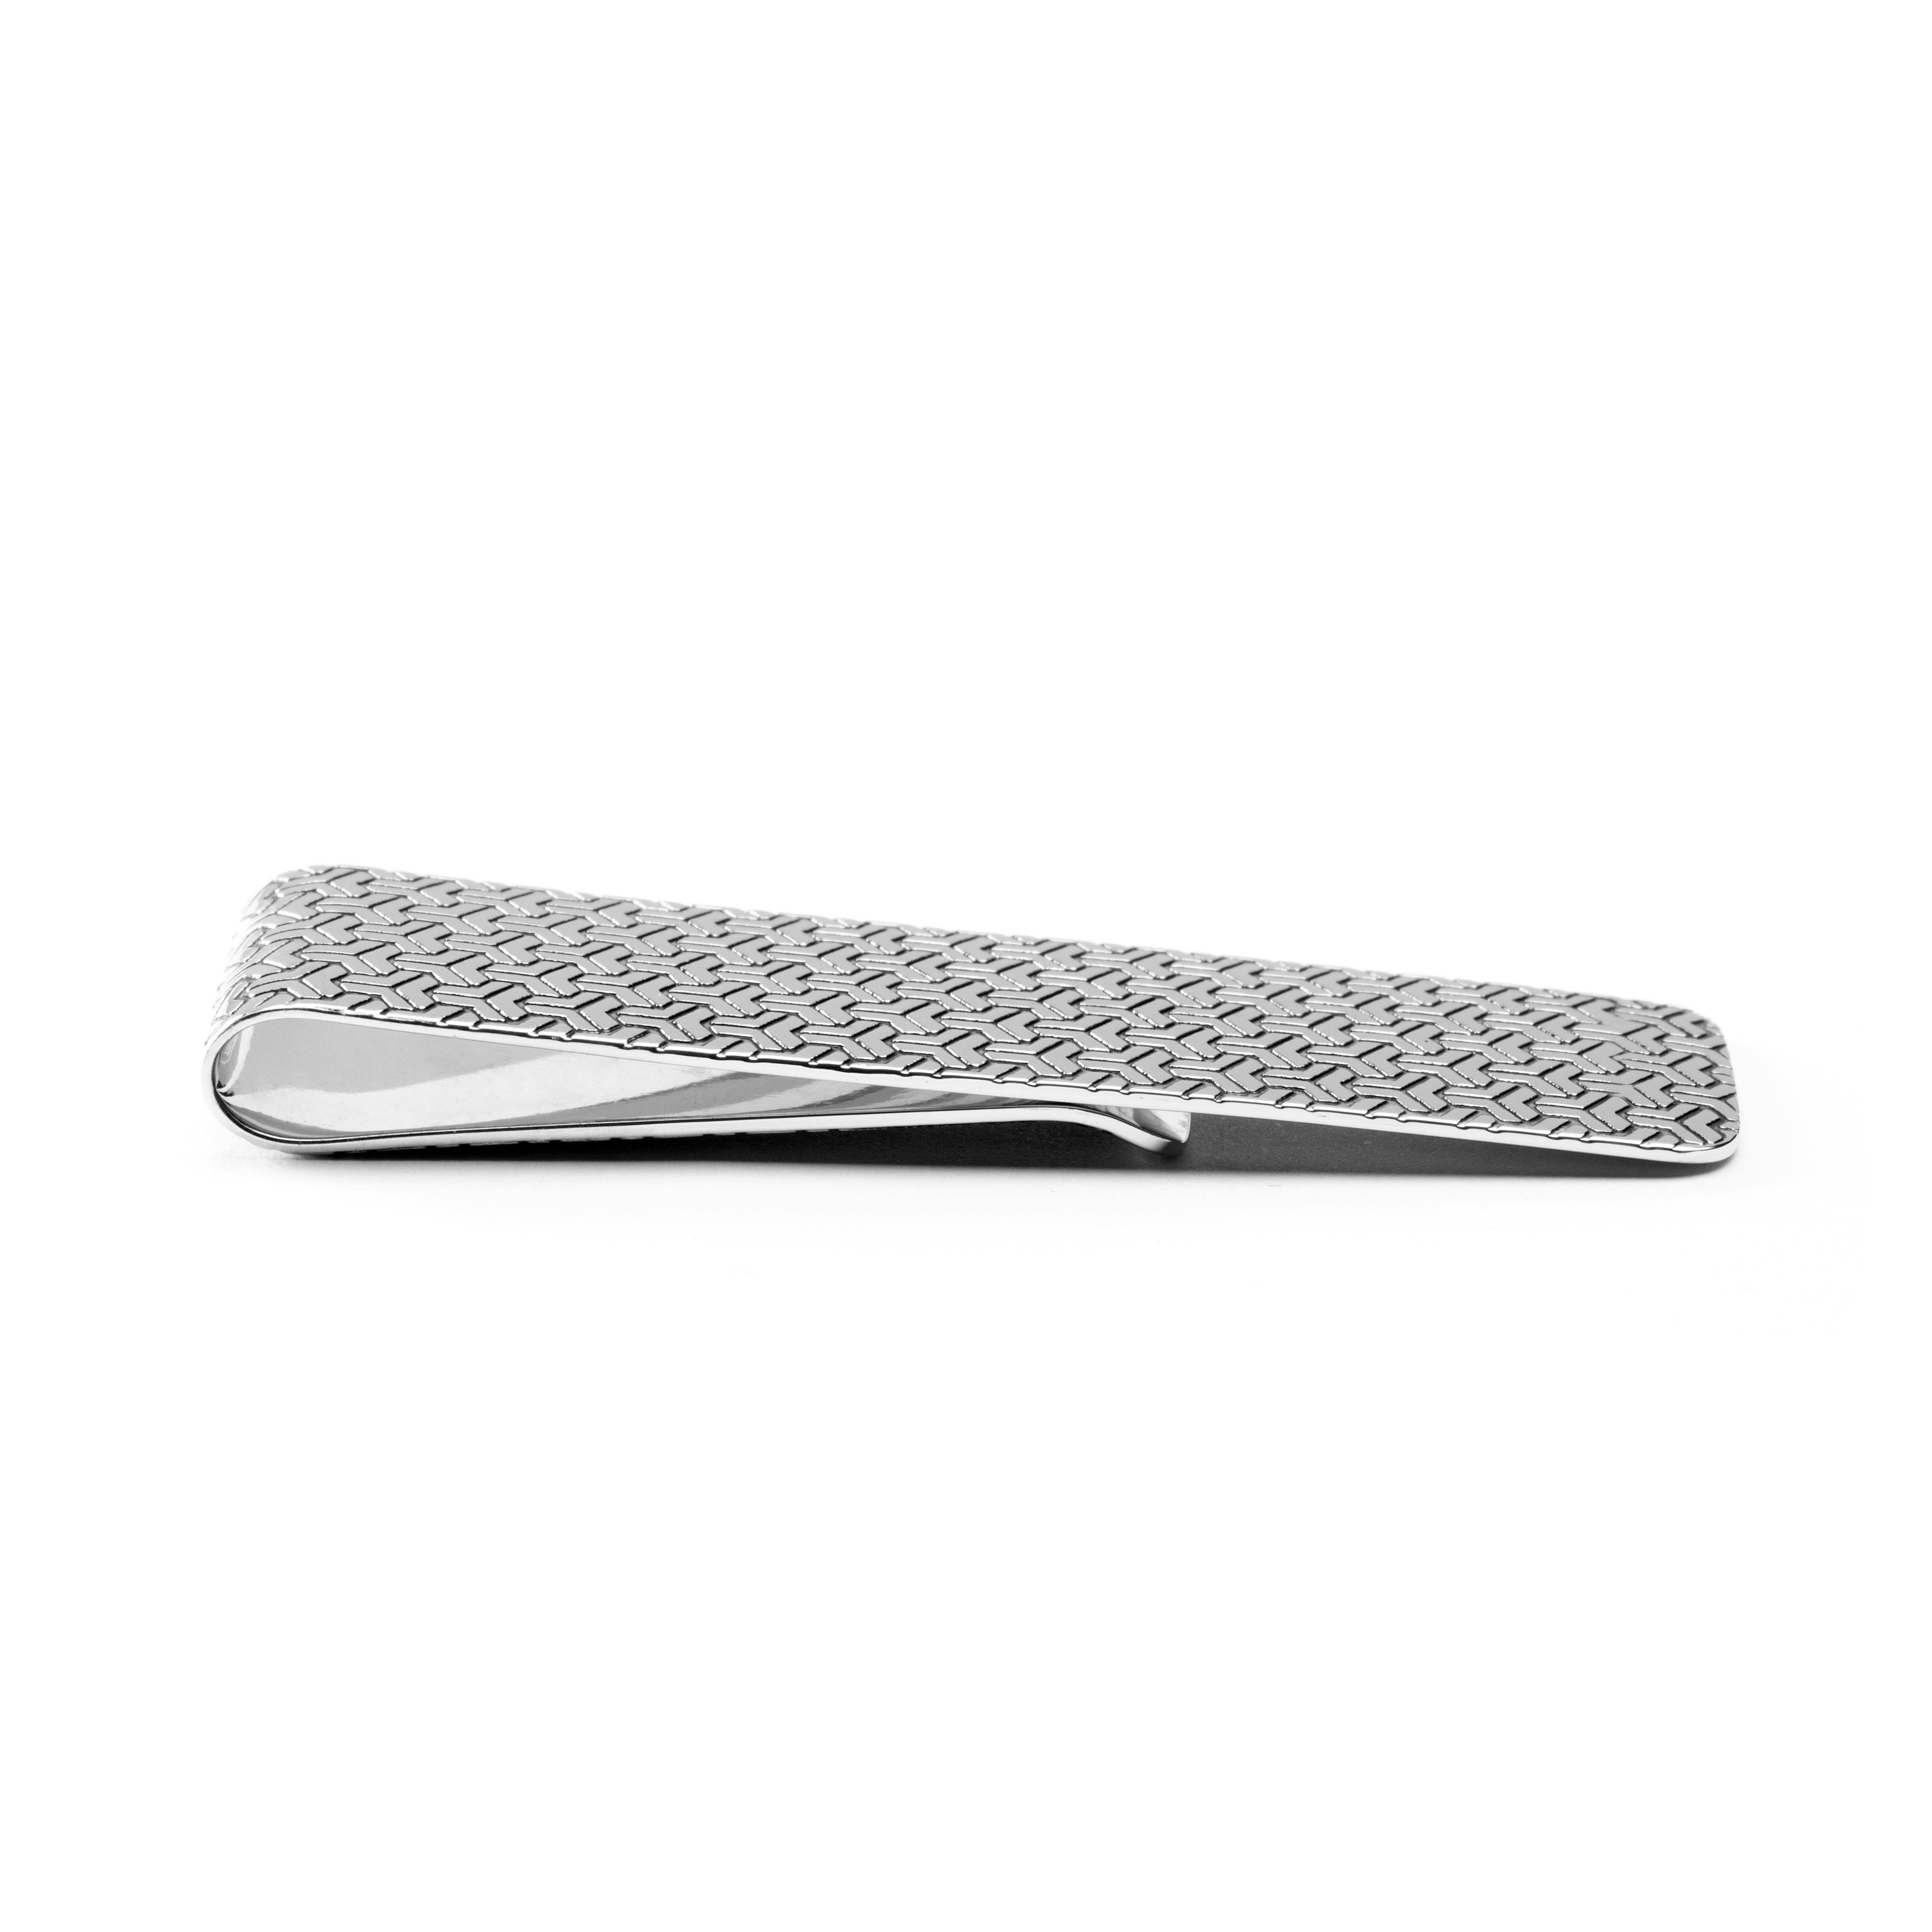 Alex Jona hand crafted in Italy, rhodium plated Sterling Silver money clip.
All Jona jewelry is new and has never been previously owned or worn. Each item will arrive at your door beautifully gift wrapped in Jona boxes, put inside an elegant pouch